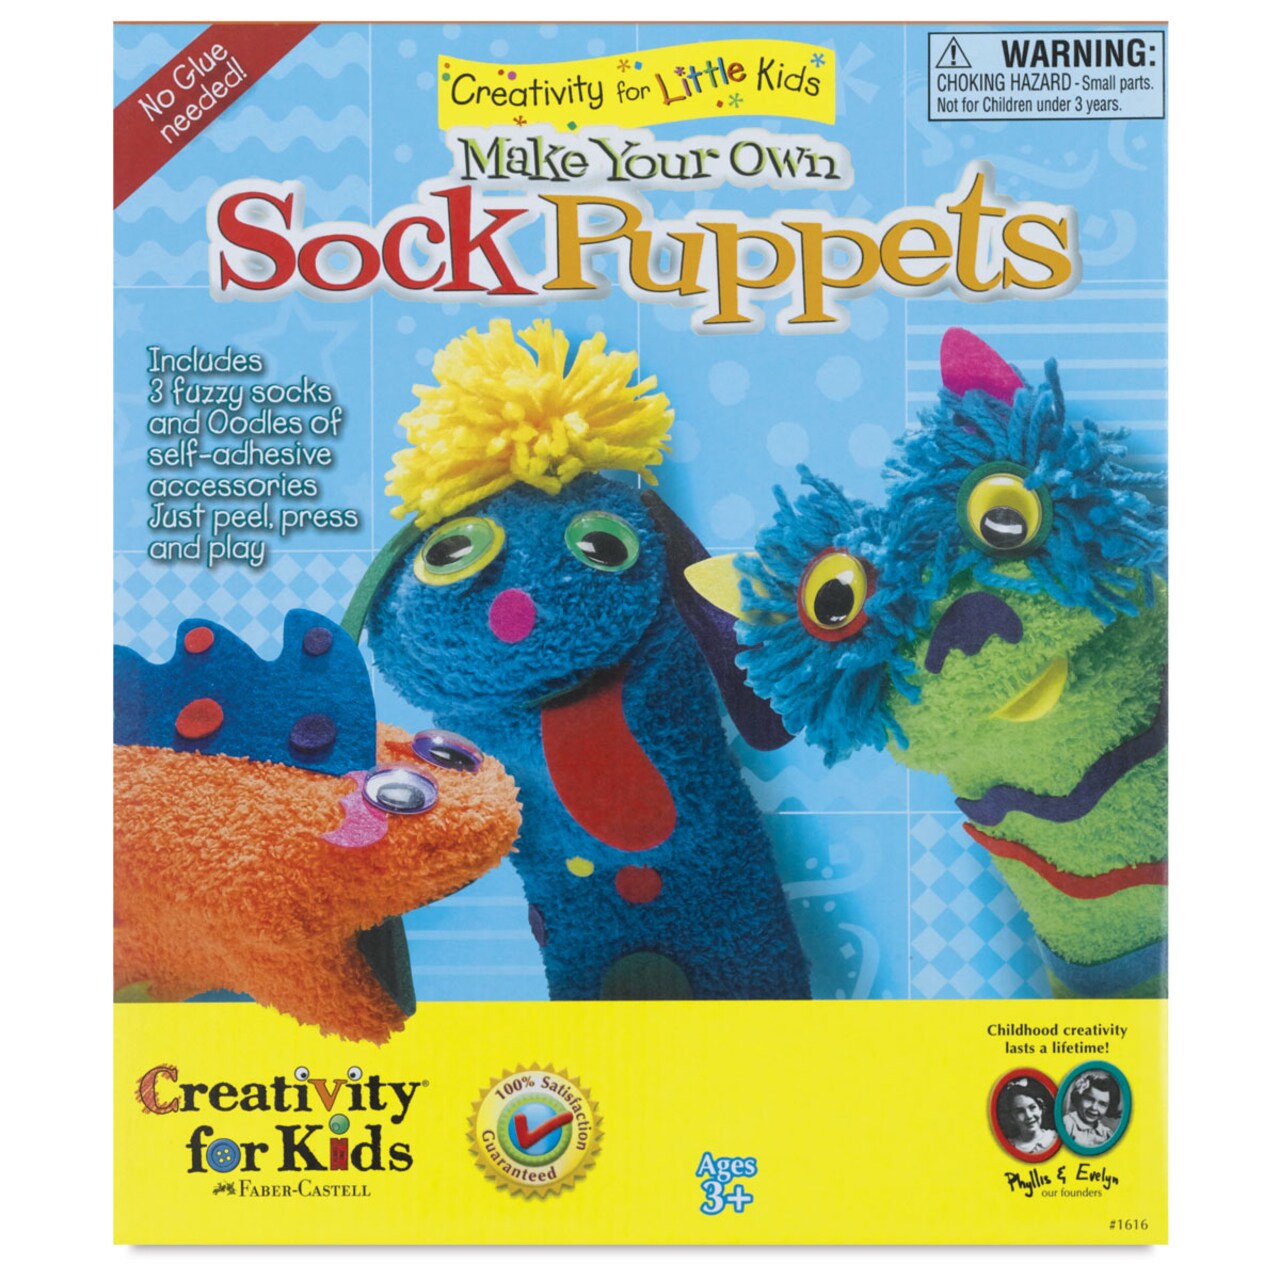 Creativity for Kids Kits - Make Your Own Sock Puppets